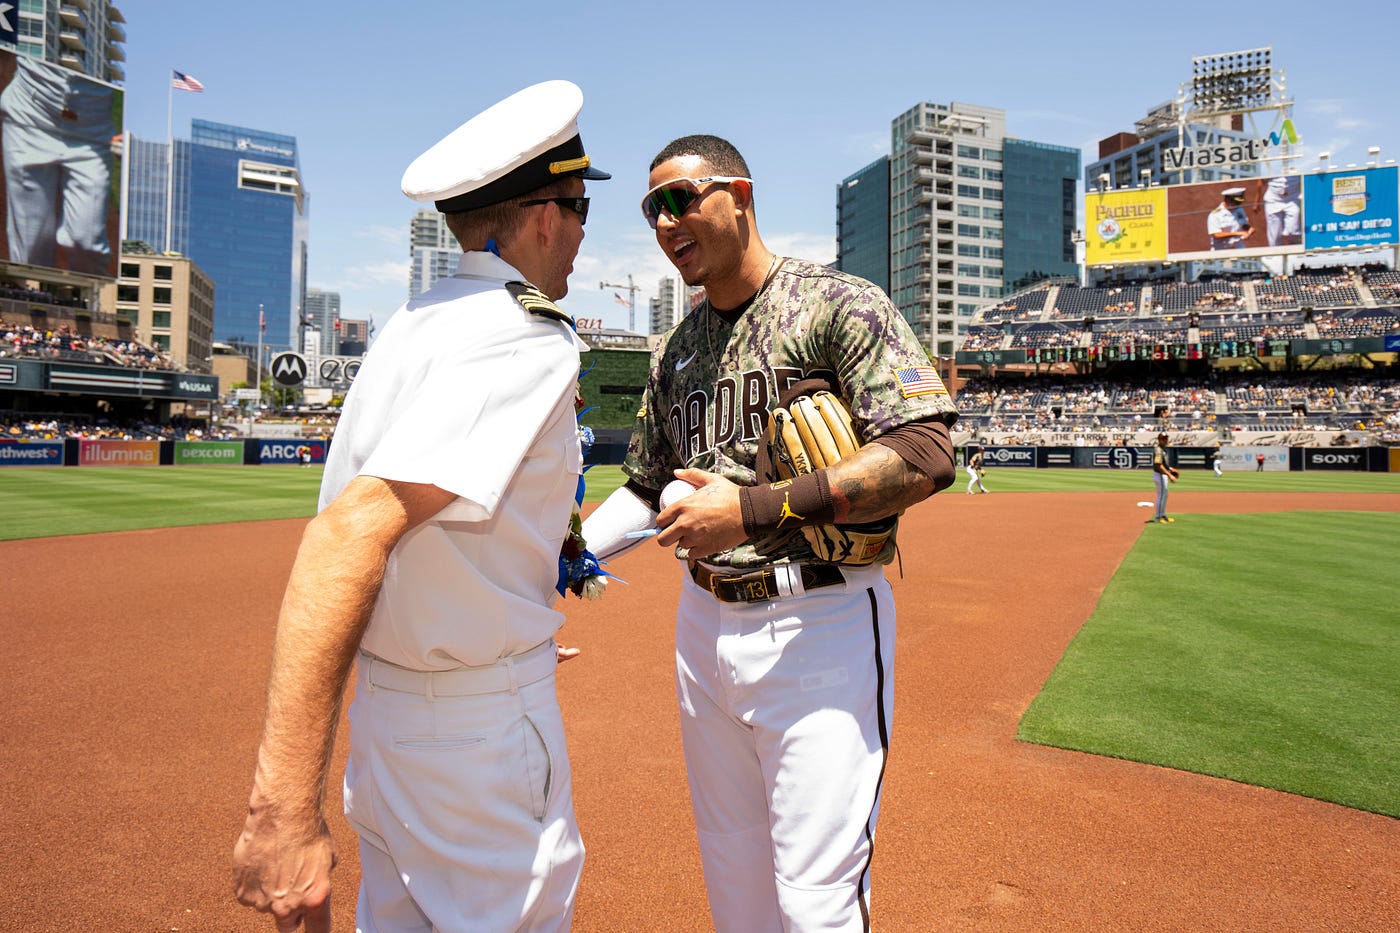 Padres Homestand №10 at Petco Park | by FriarWire | FriarWire